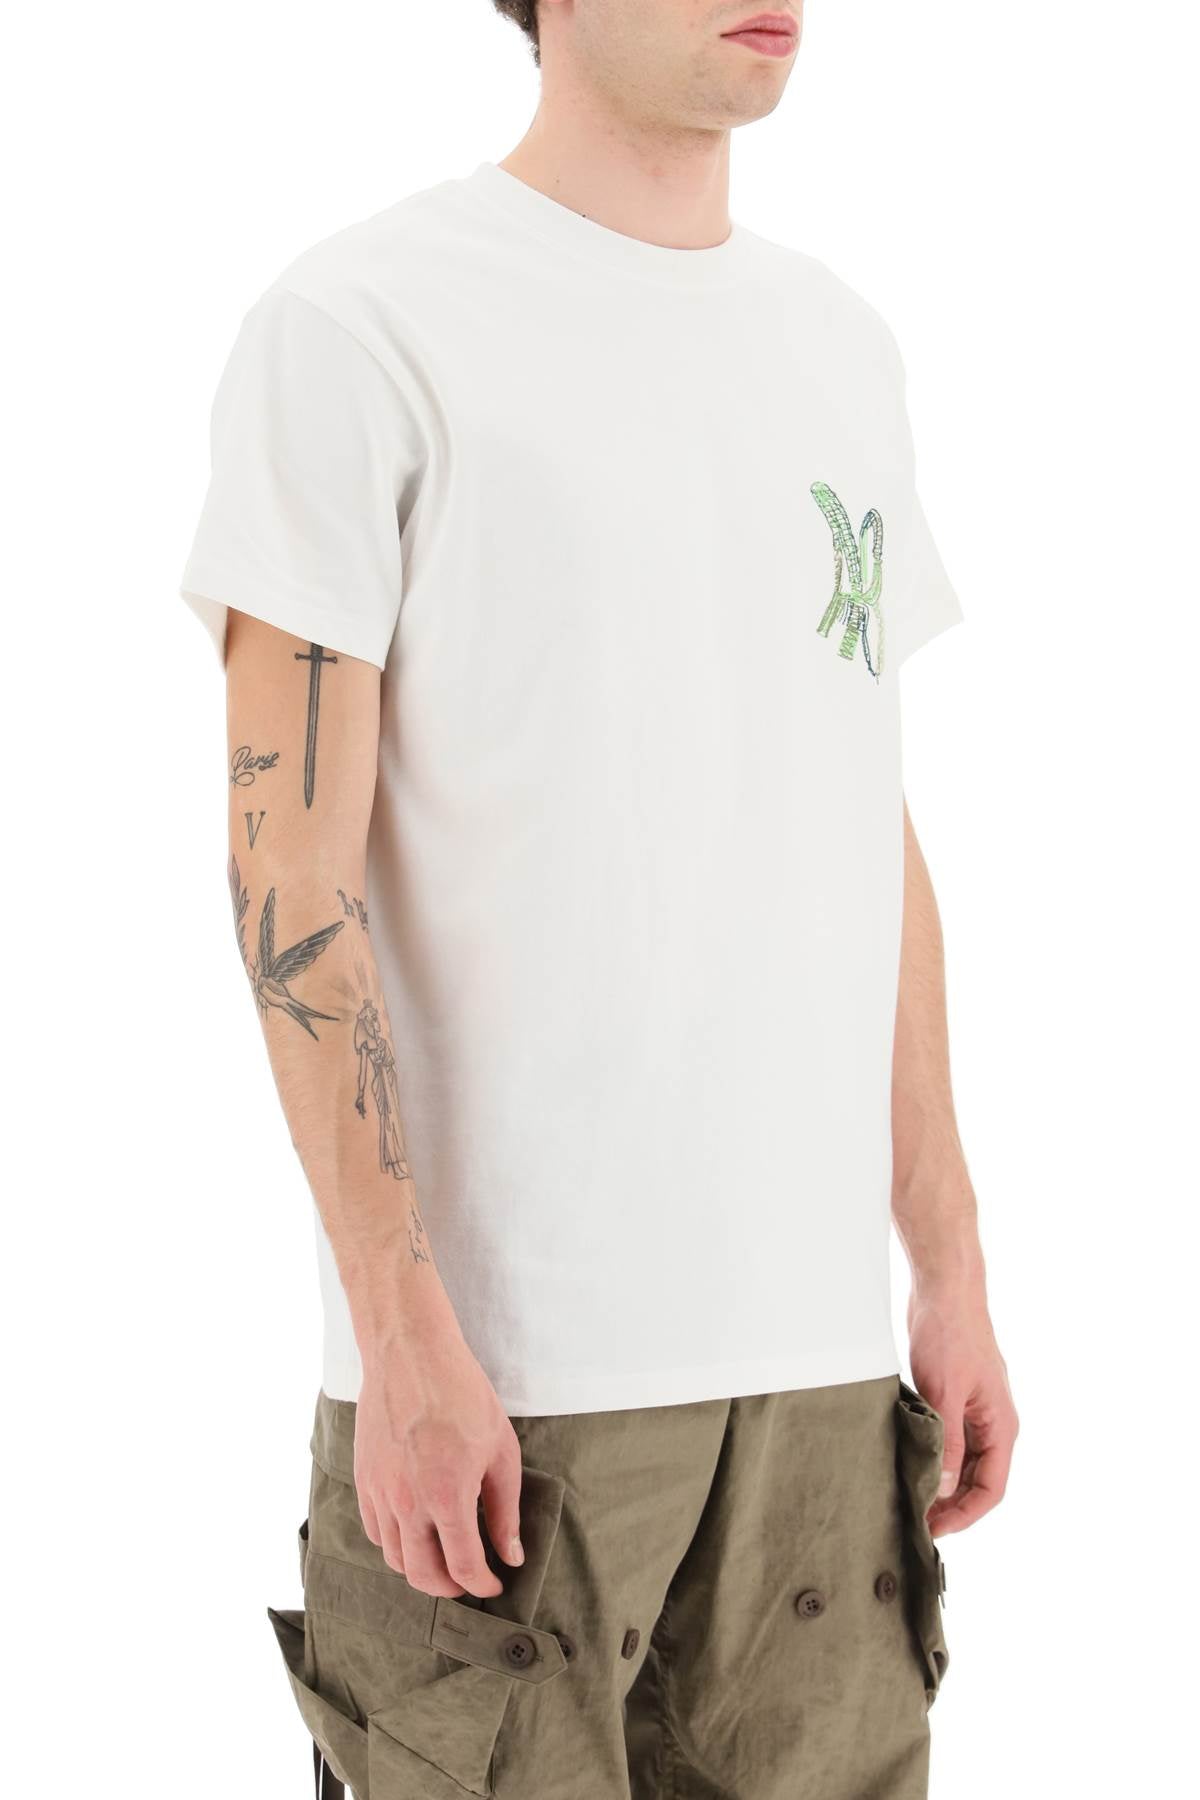 Andersson bell monogram embroidery and rear maxi print t-shirt